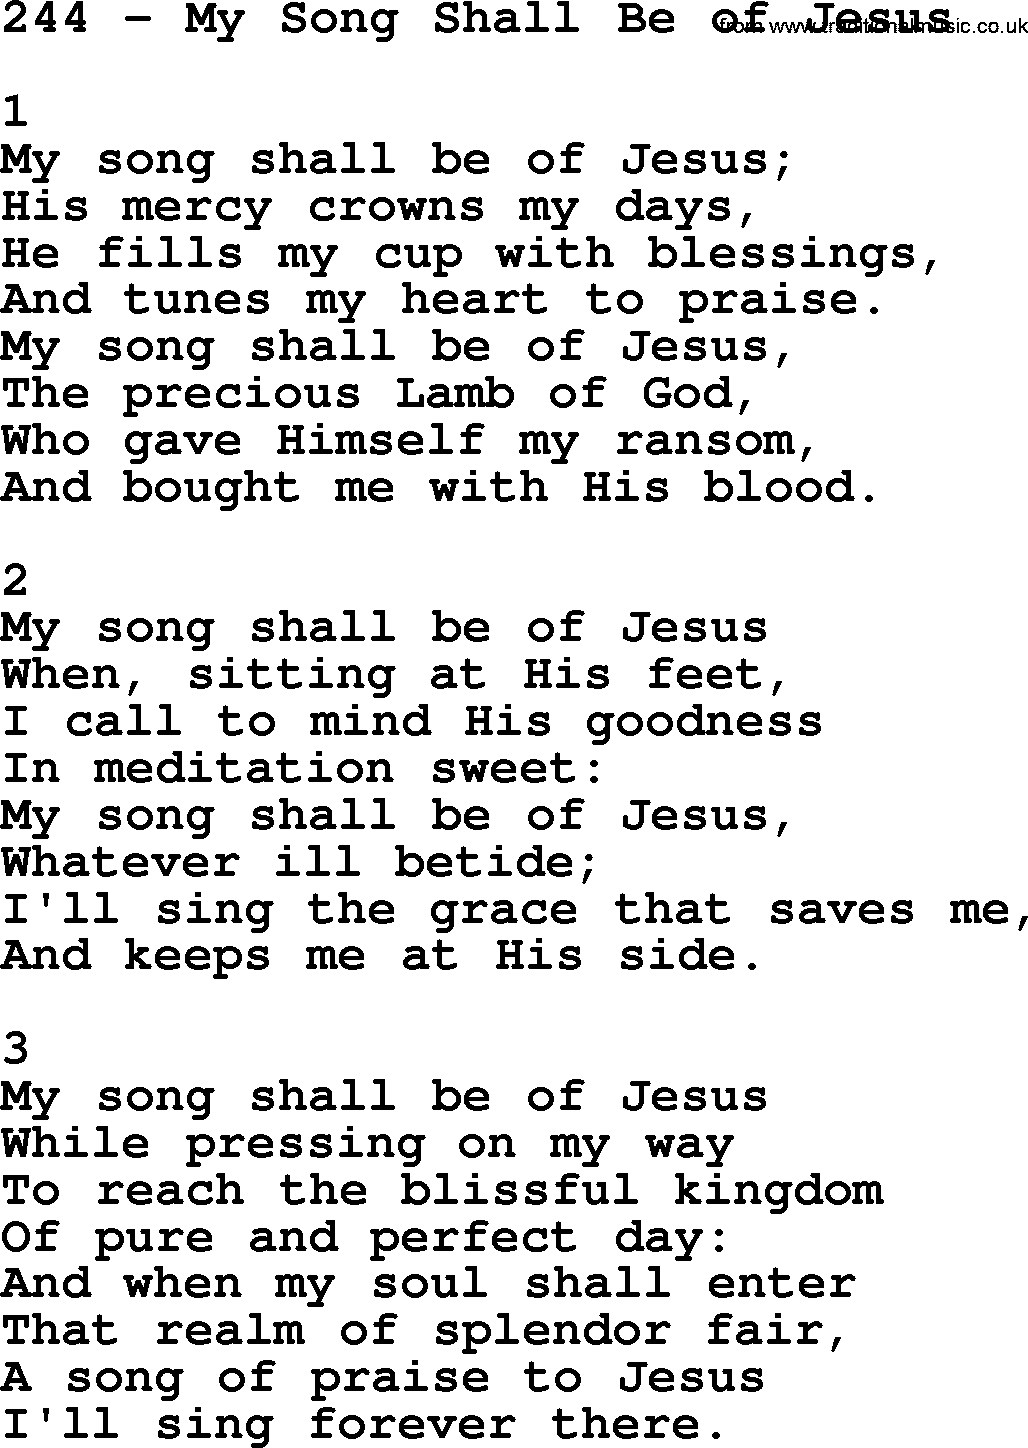 Complete Adventis Hymnal, title: 244-My Song Shall Be Of Jesus, with lyrics, midi, mp3, powerpoints(PPT) and PDF,